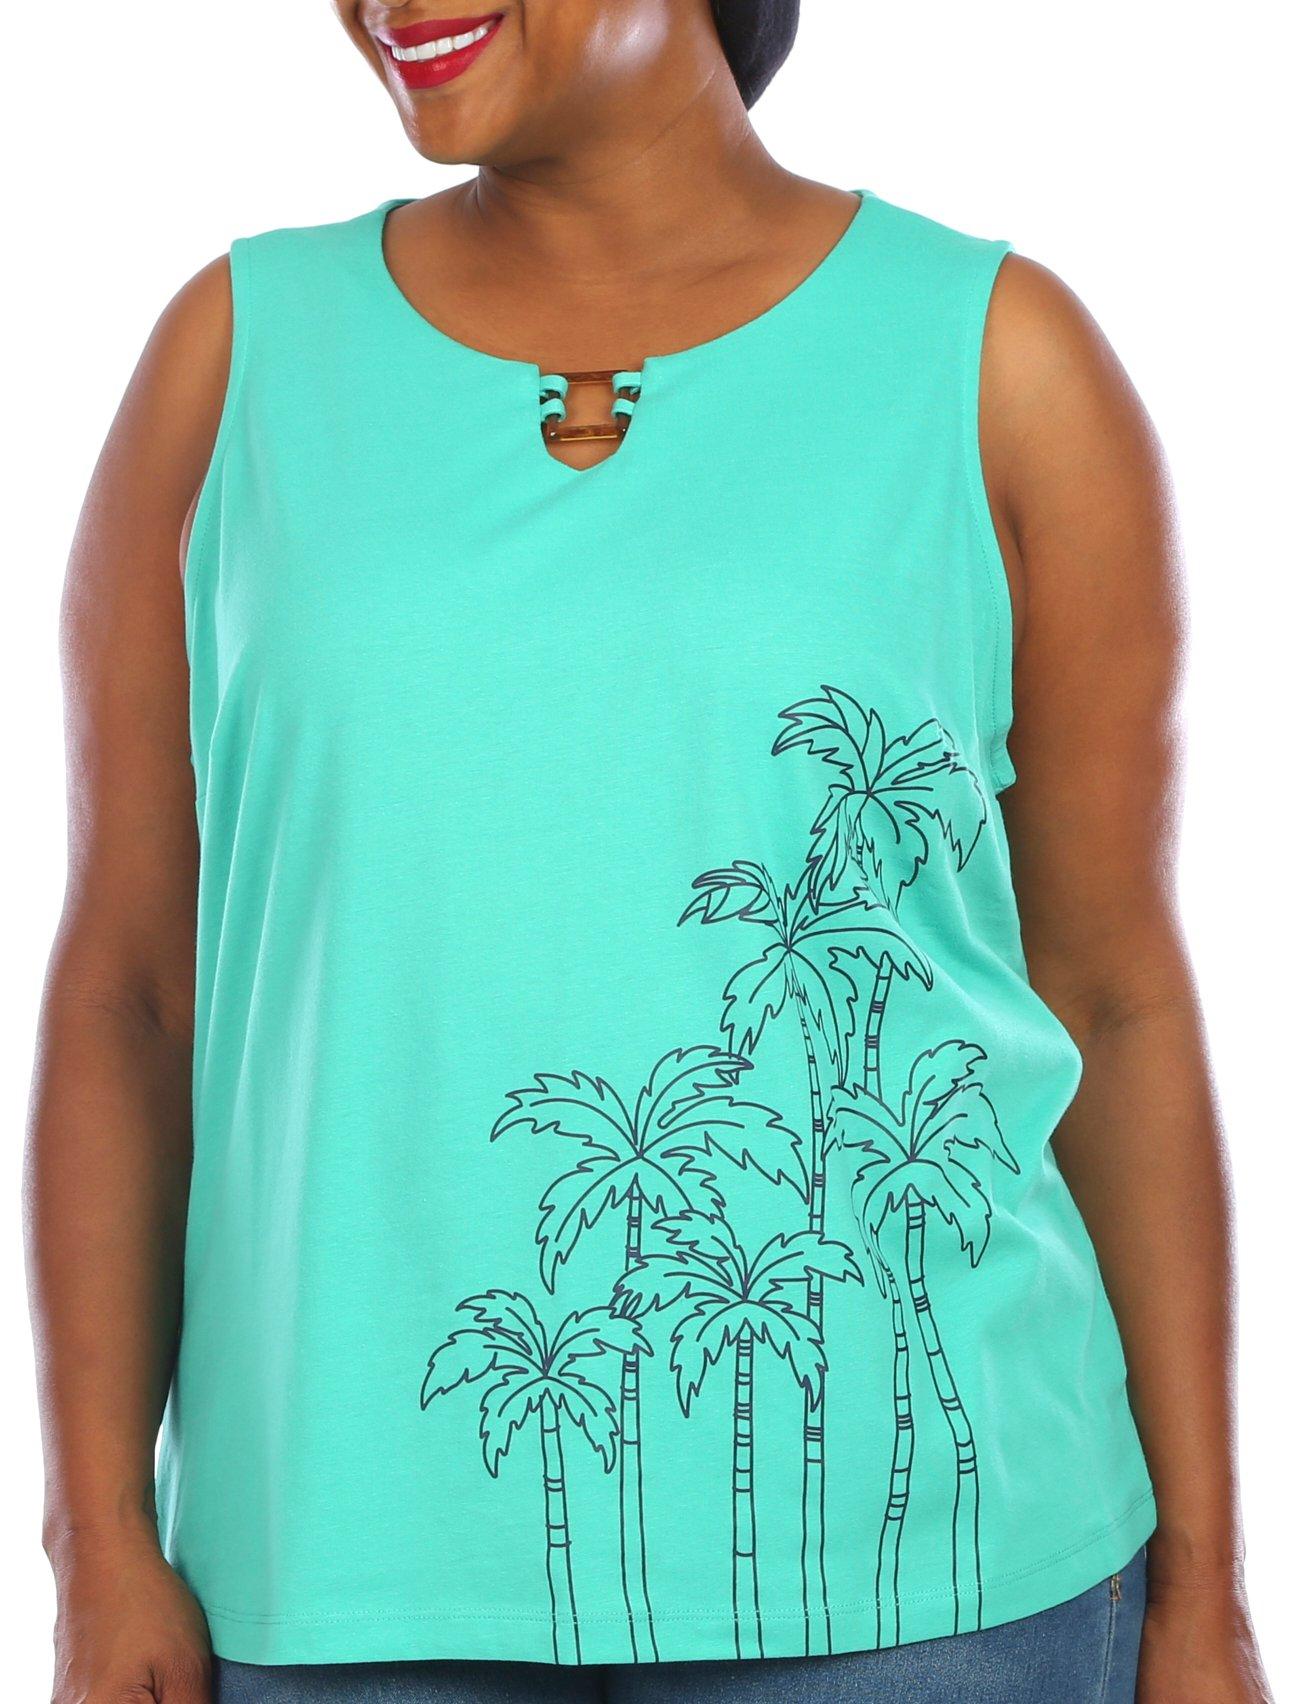 Coral Bay Plus Palm Print Square Ring Sleeveless Top